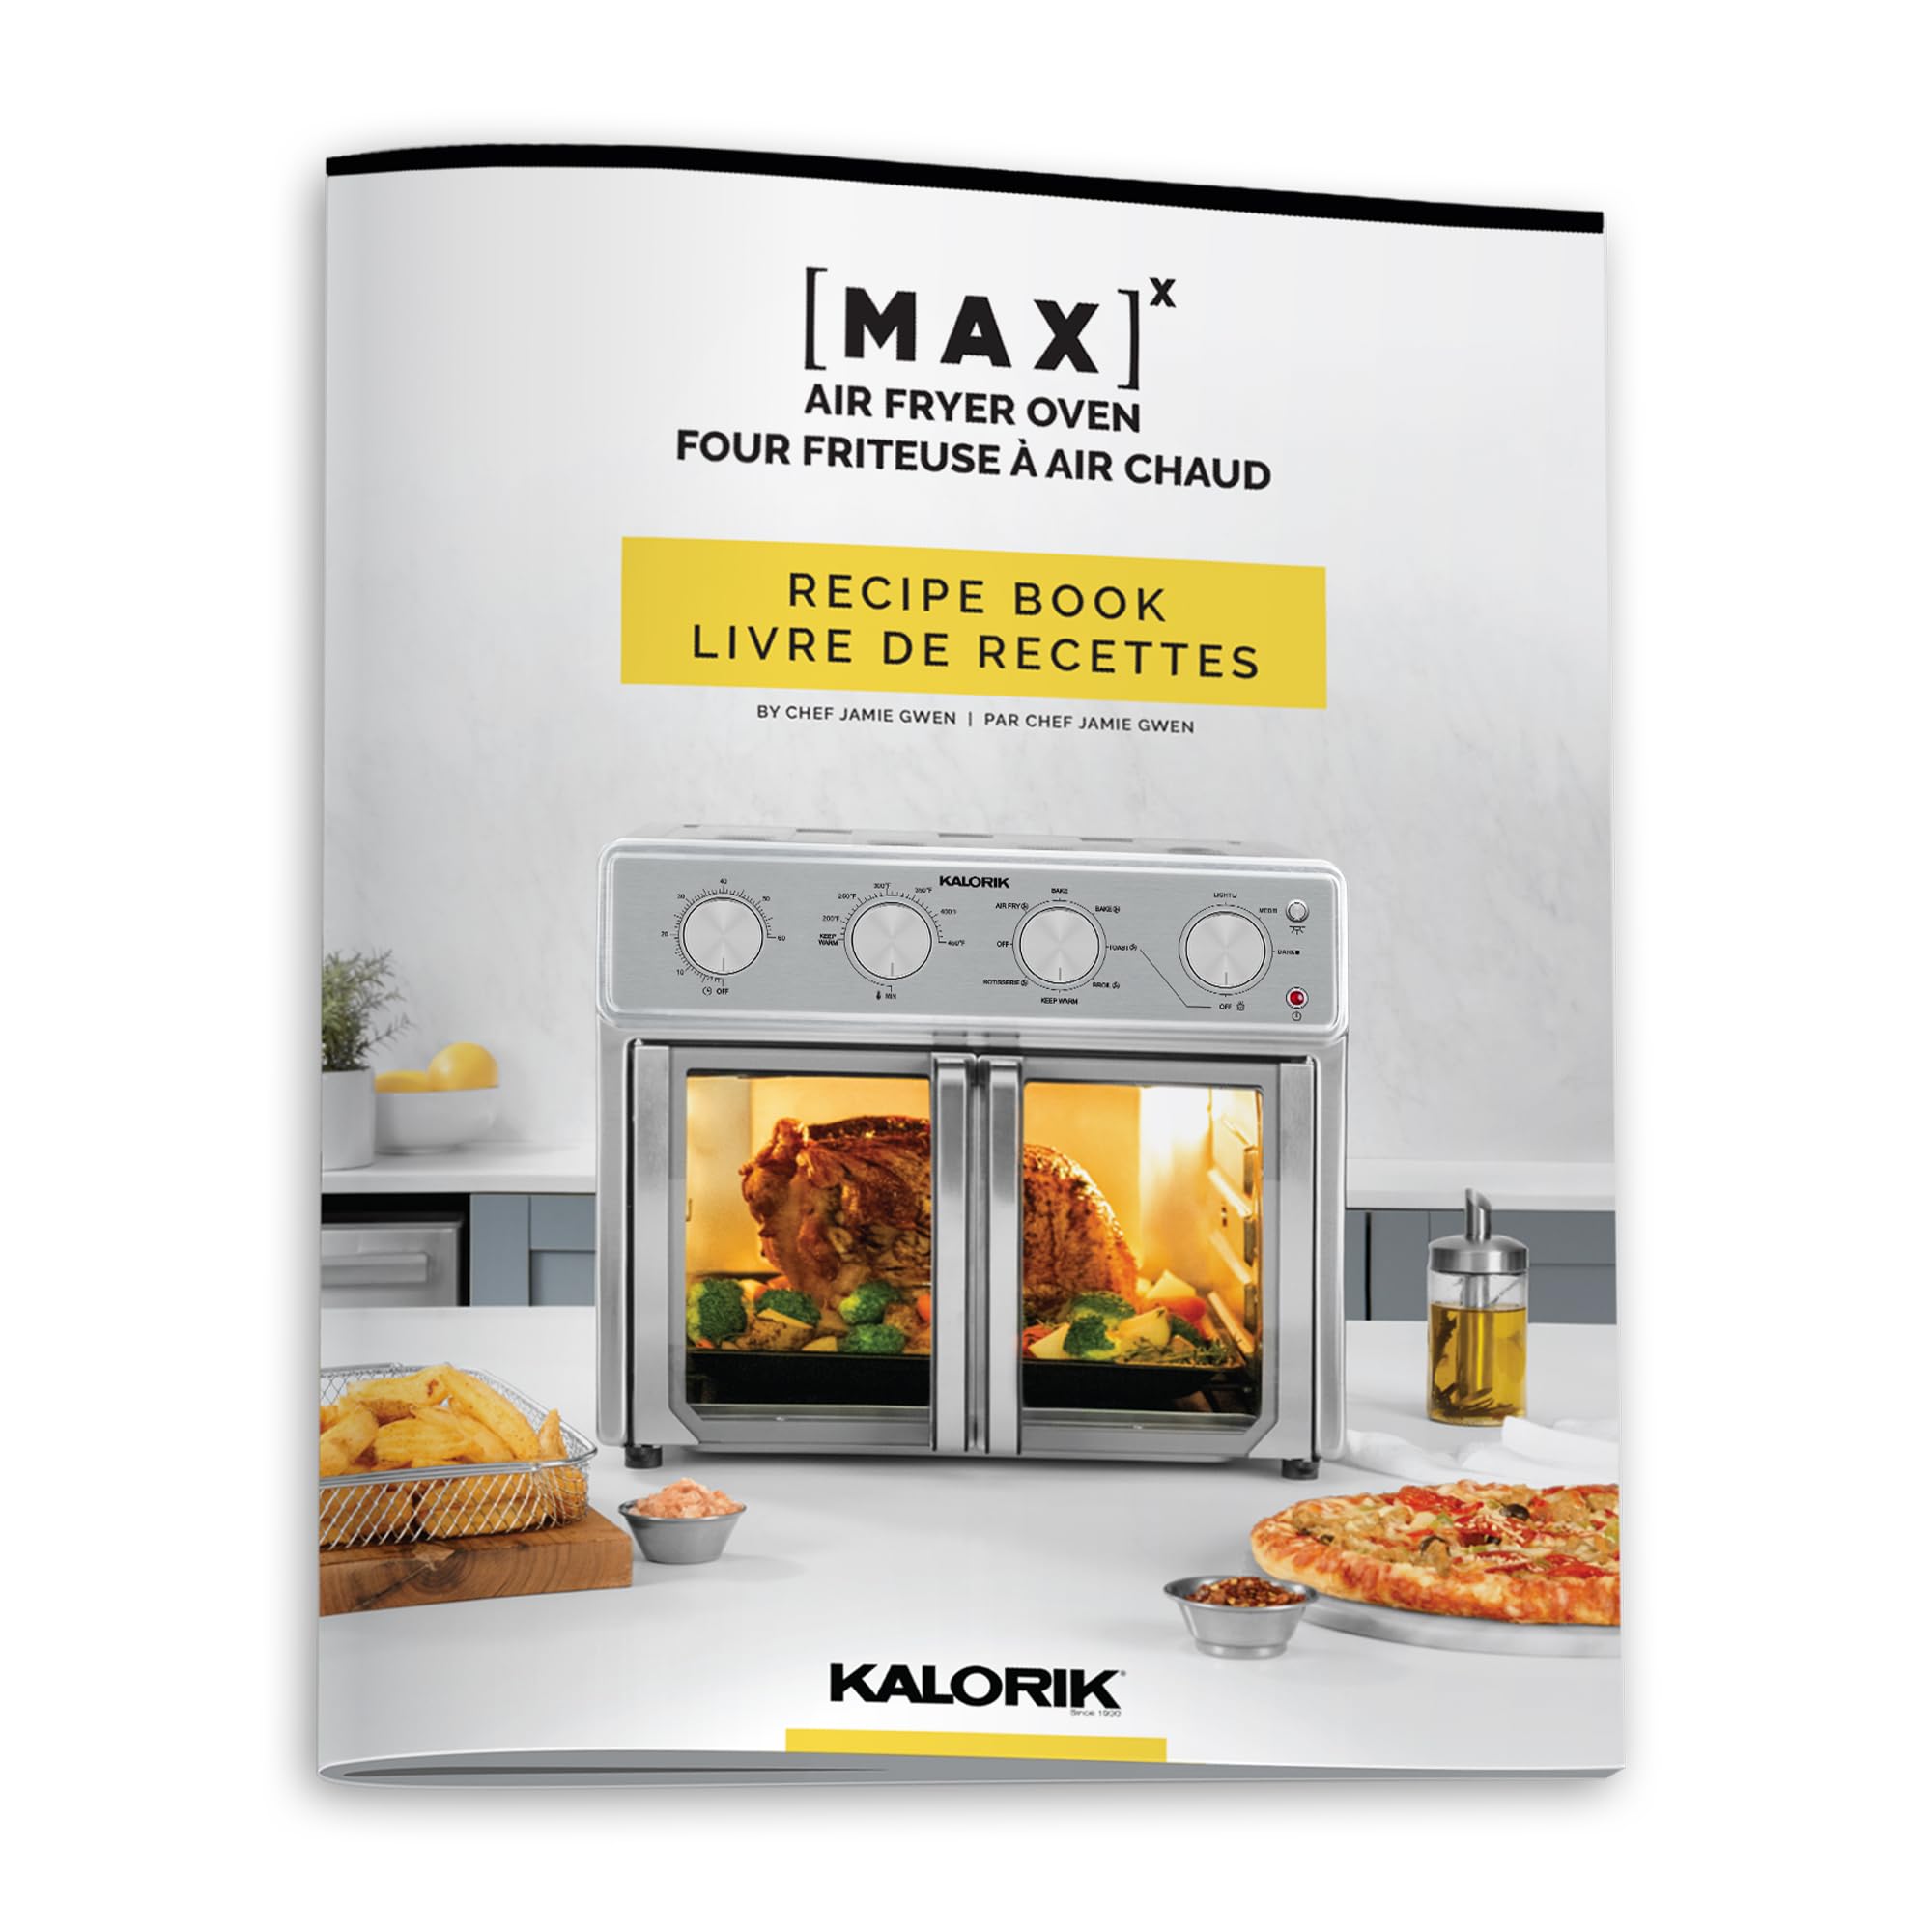 Kalorik MAXX® Air Fryer Oven, 26 Quart 9-in-1 Countertop Toaster Oven and Air Fryer Combo - Fry, Bake, Roast, Rotisserie, & More, 7 Easy-to-Clean Accessories, 1700W, Stainless Steel, AFO 47267 OW